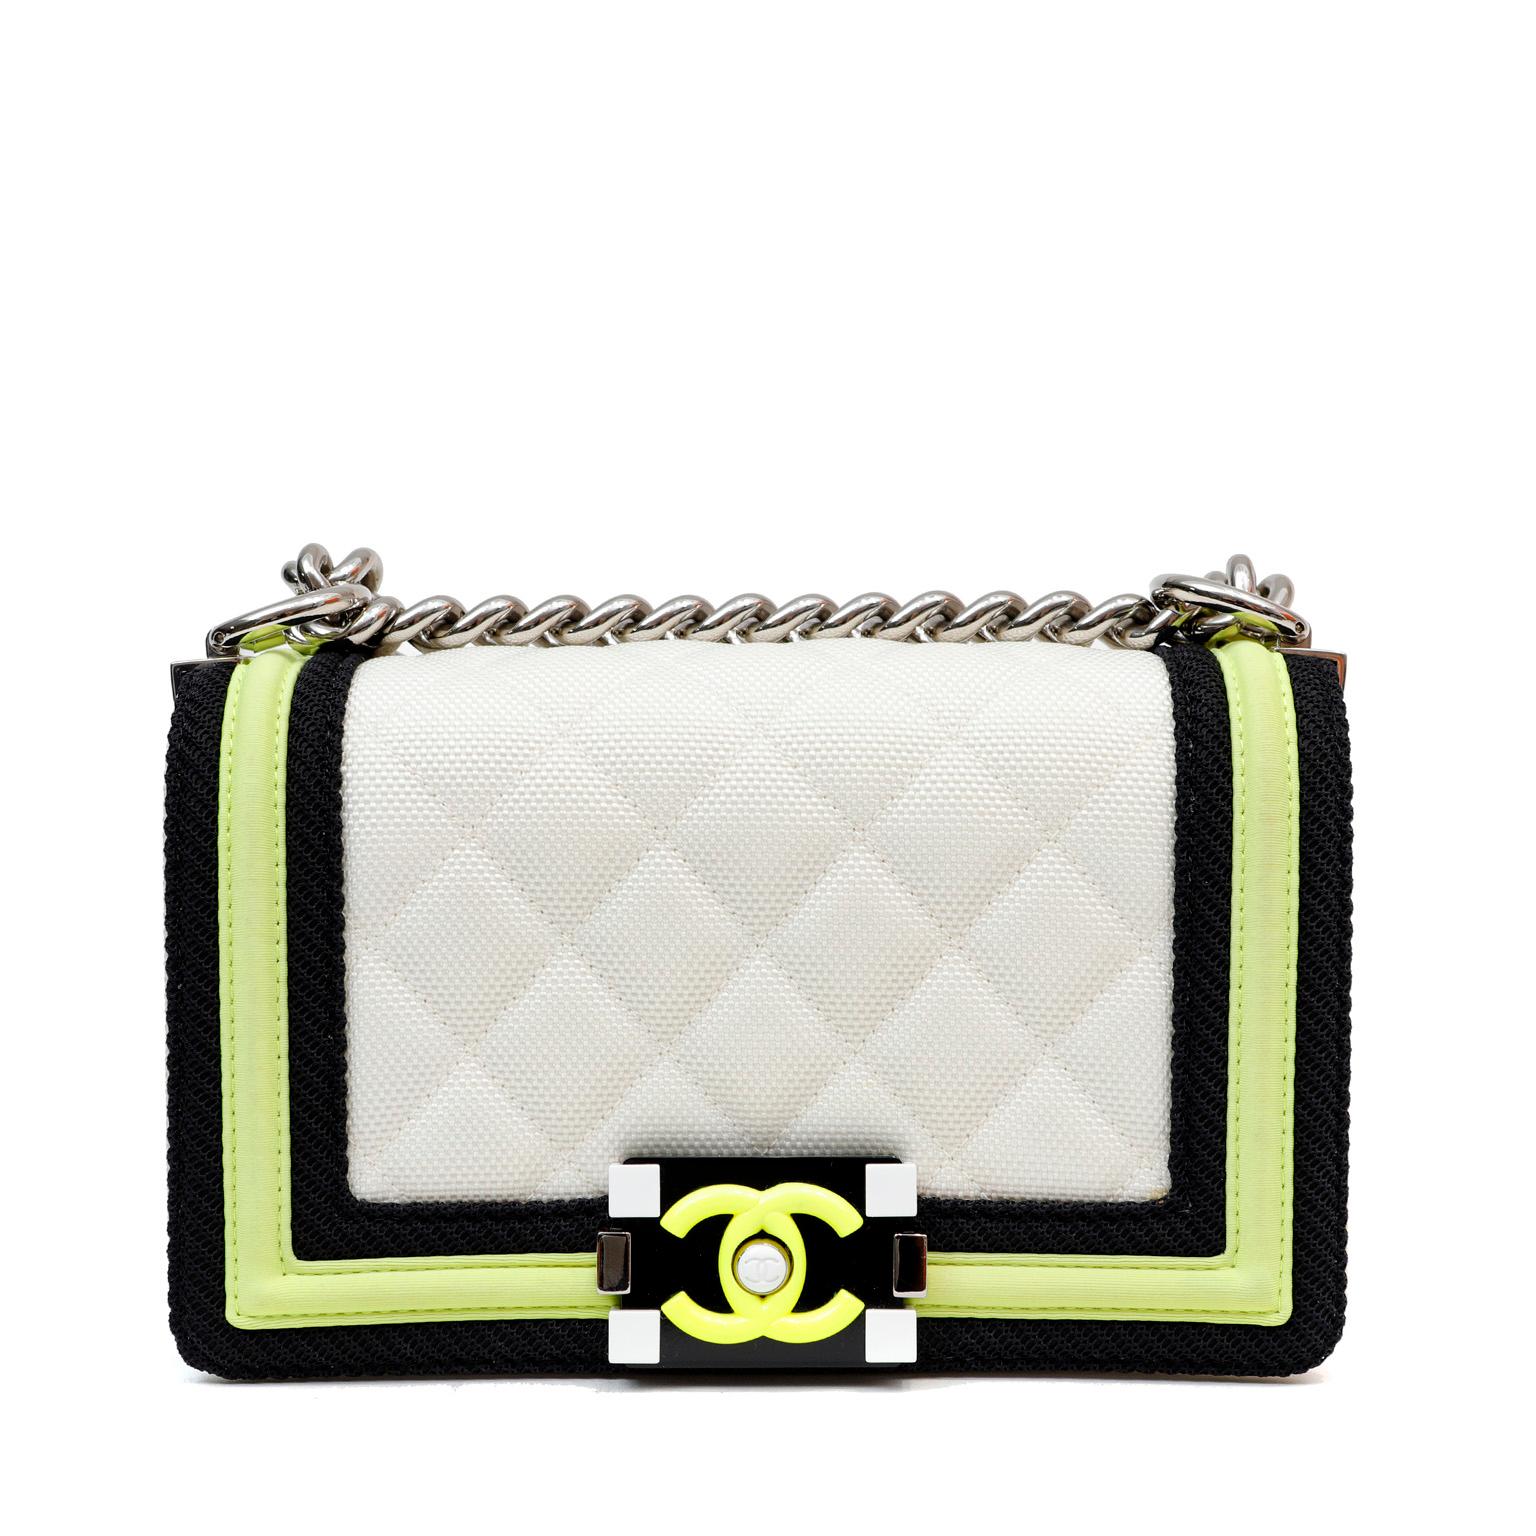 This authentic Chanel White Canvas Fluo Flap Boy Bag is in pristine condition. The updated design is structured and edgy with a versatility that makes it extremely popular.  The canvas Fluo Flap version takes details a step further with neon pops of